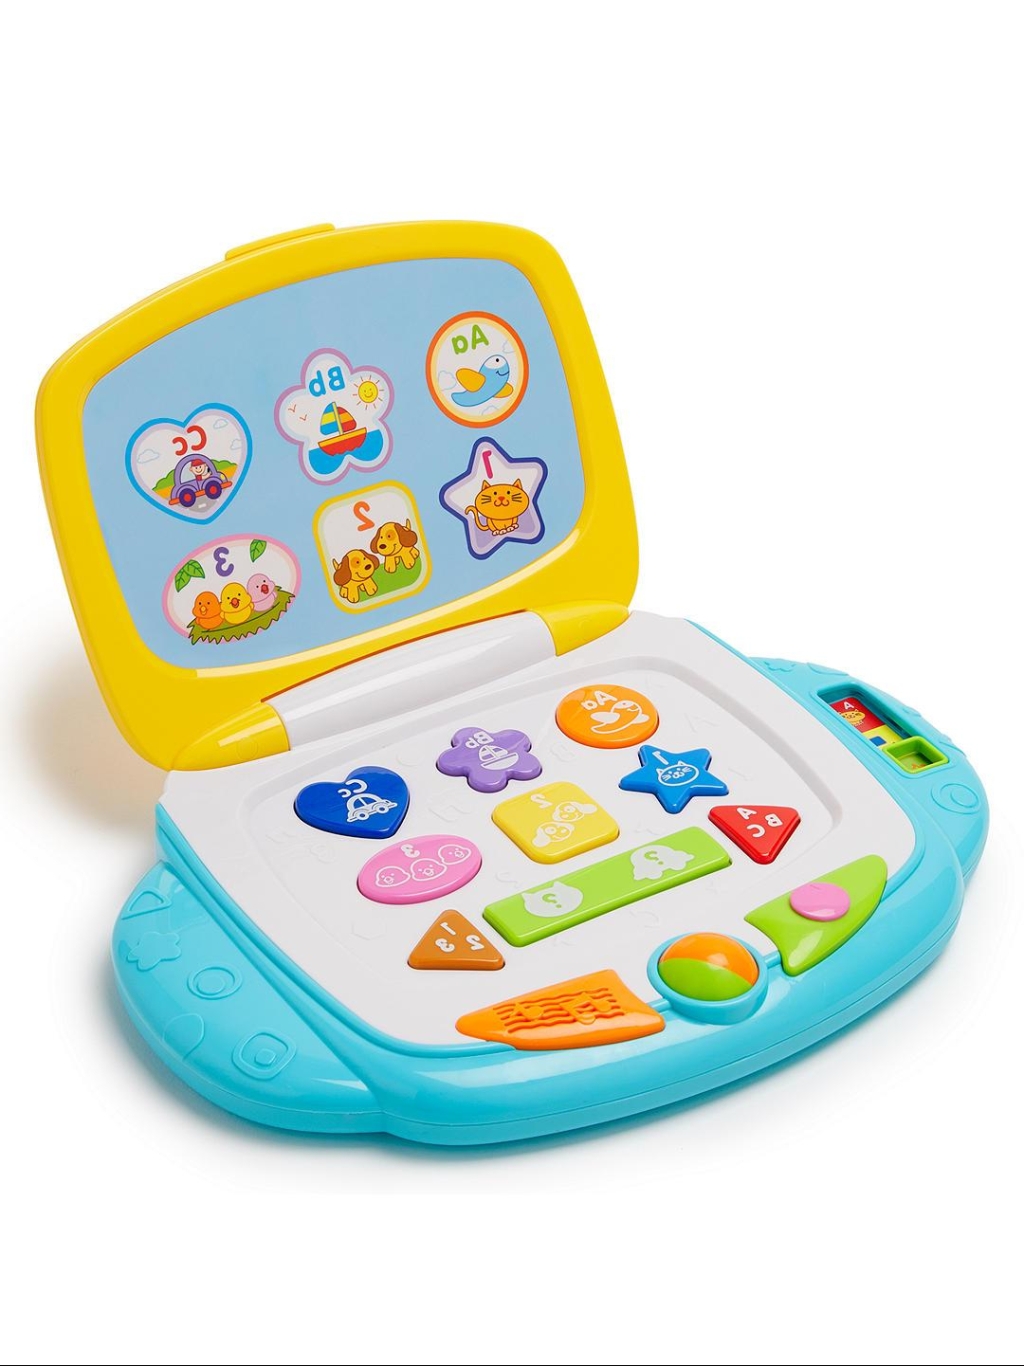 My First Laptop toy Kids Stuff 2011 infant toddler toy